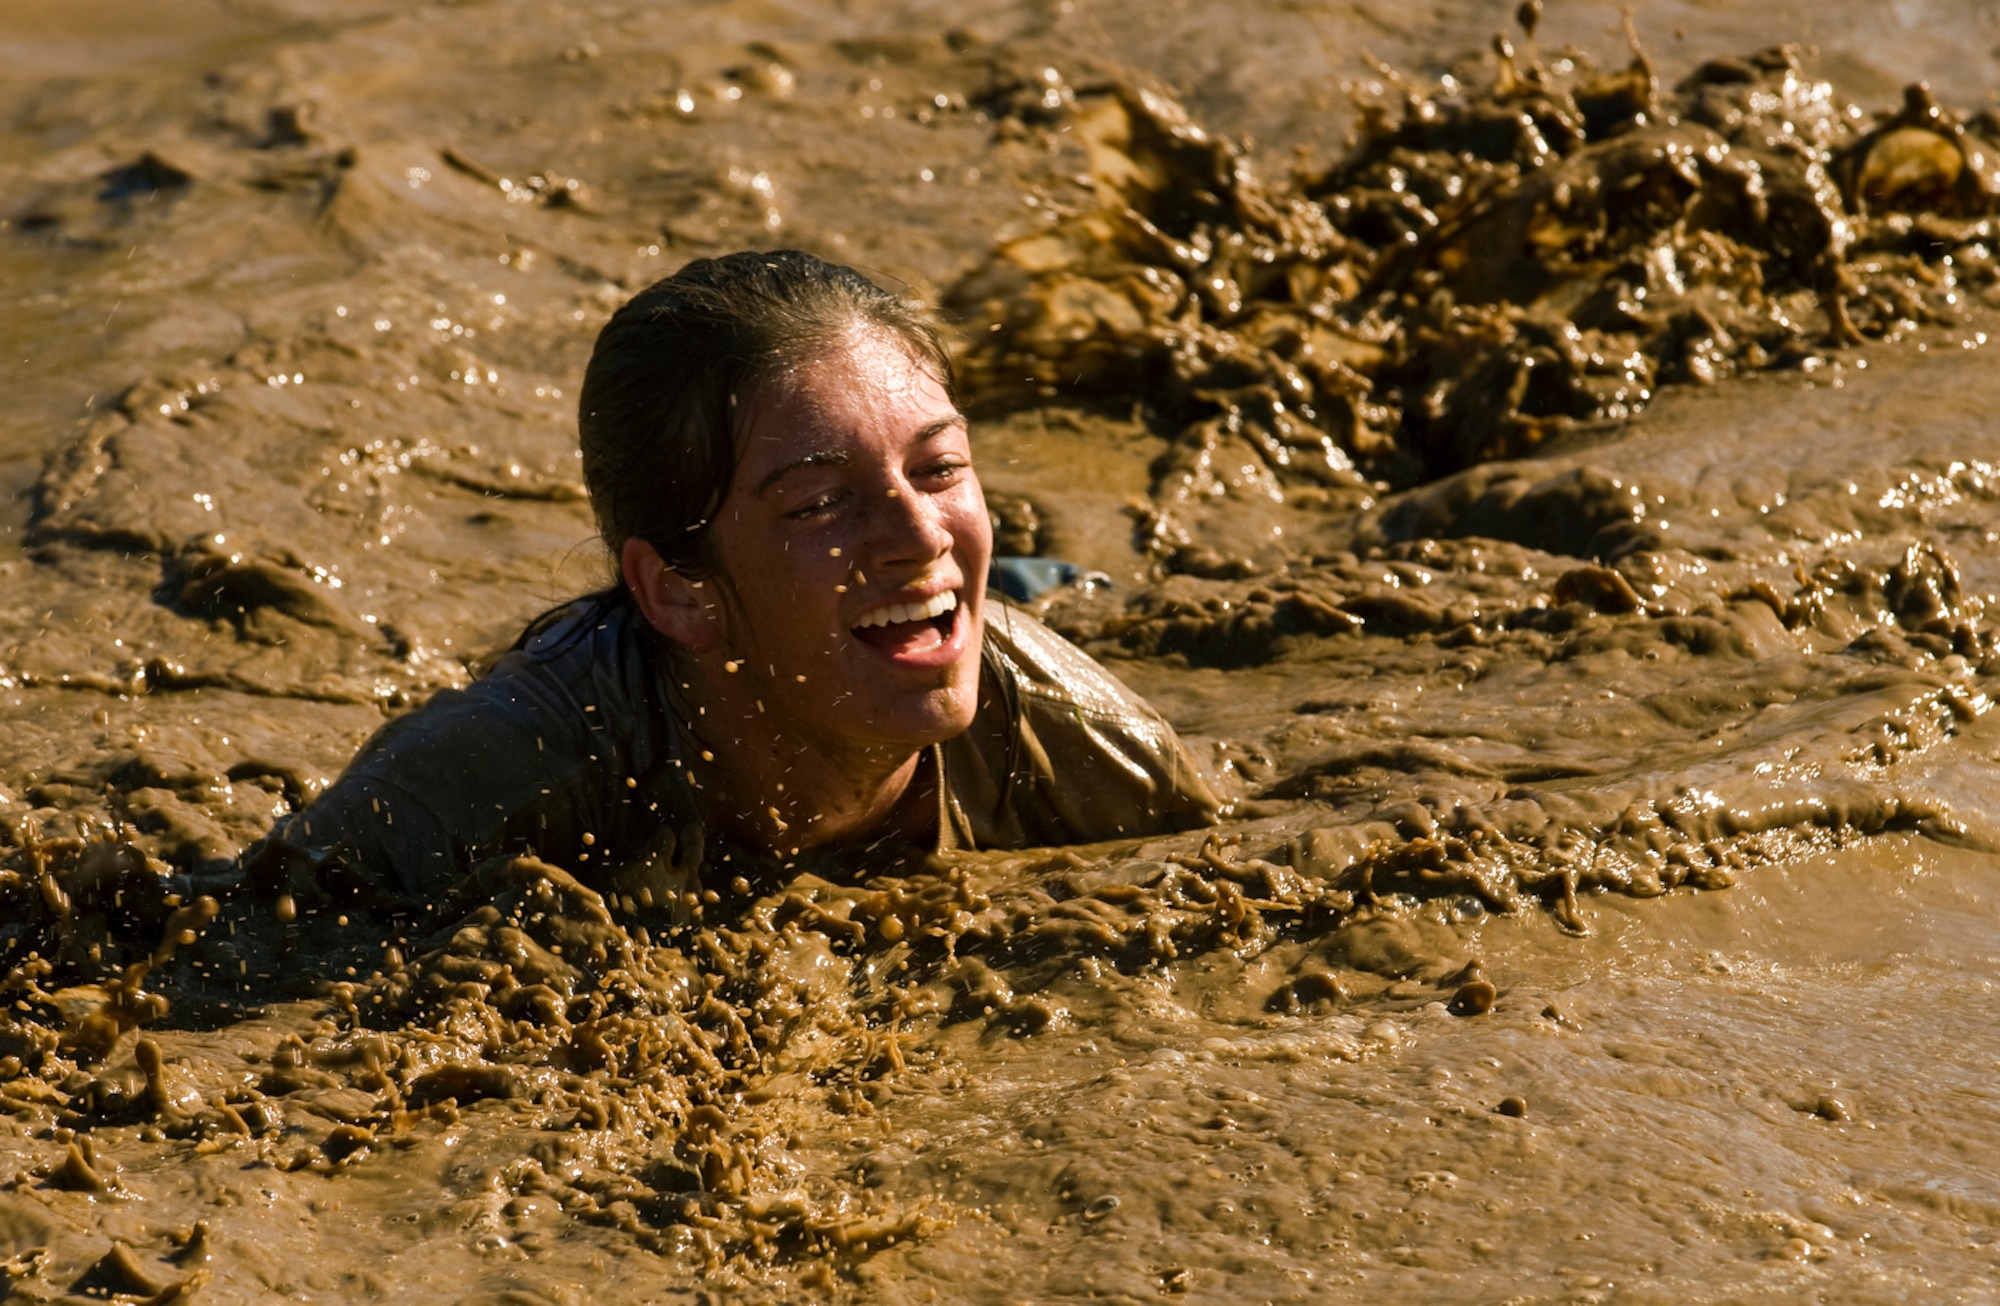 Staff Sgt. Lindella Huguet laughs her way through the mud during the 10th Annual Mather Mud Run in Rancho Cordova, Calif., Sept. 5, 2009, for Air Force Week Sacramento. The Mud Run features a 5-mile or 2-mile obstacle course boot camp challenge featuring low walls, tunnel crawls, tire run, hay bale jumps and a low-crawl mud pit. Air Force Week Sacramento is an event using various activities and exhibitions to educate the local community about the Air Force's capabilities and missions. Sergeant Huguet is a member of the 615 Contingency Response Wing at Travis Air Force Base, Calif. (U.S. Air Force photo/Staff Sgt. Bennie J. Davis III) 